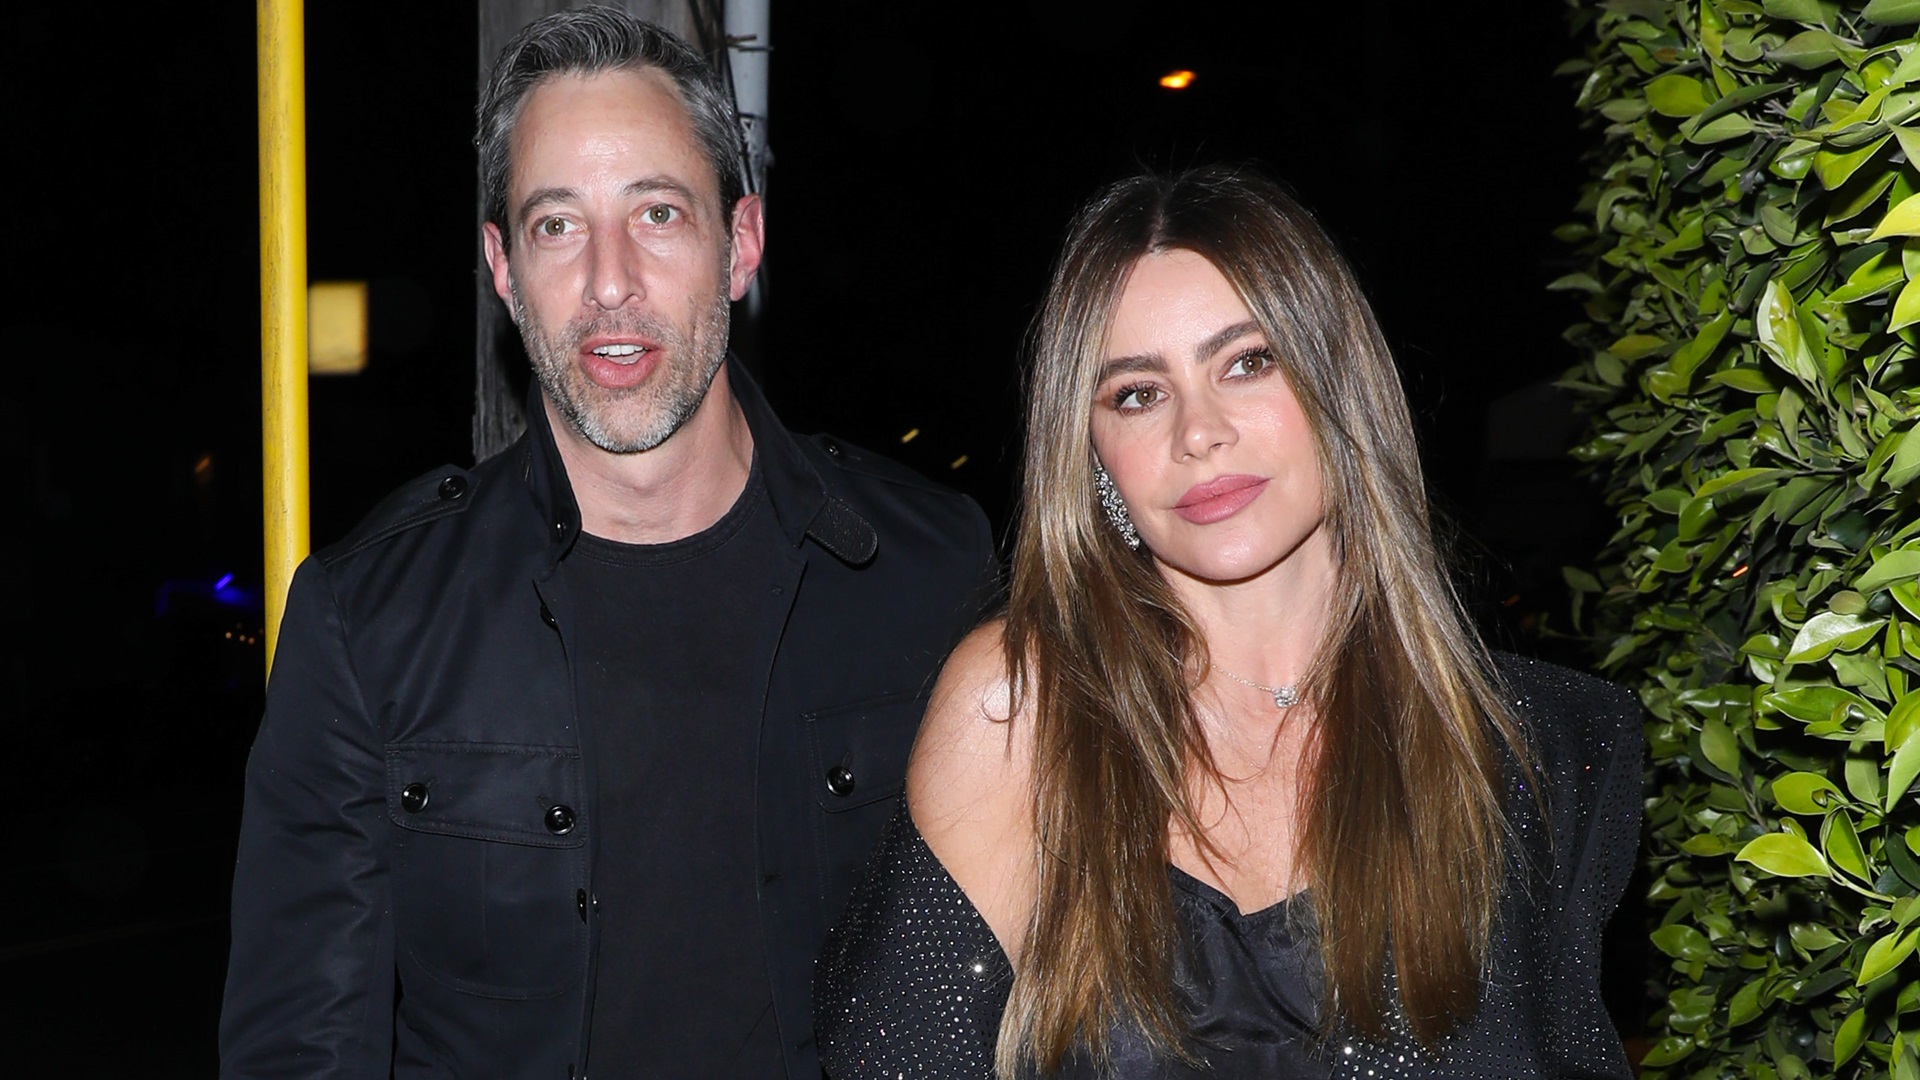 Sofia Vergara confirms new relationship: Who is he and what does he do?